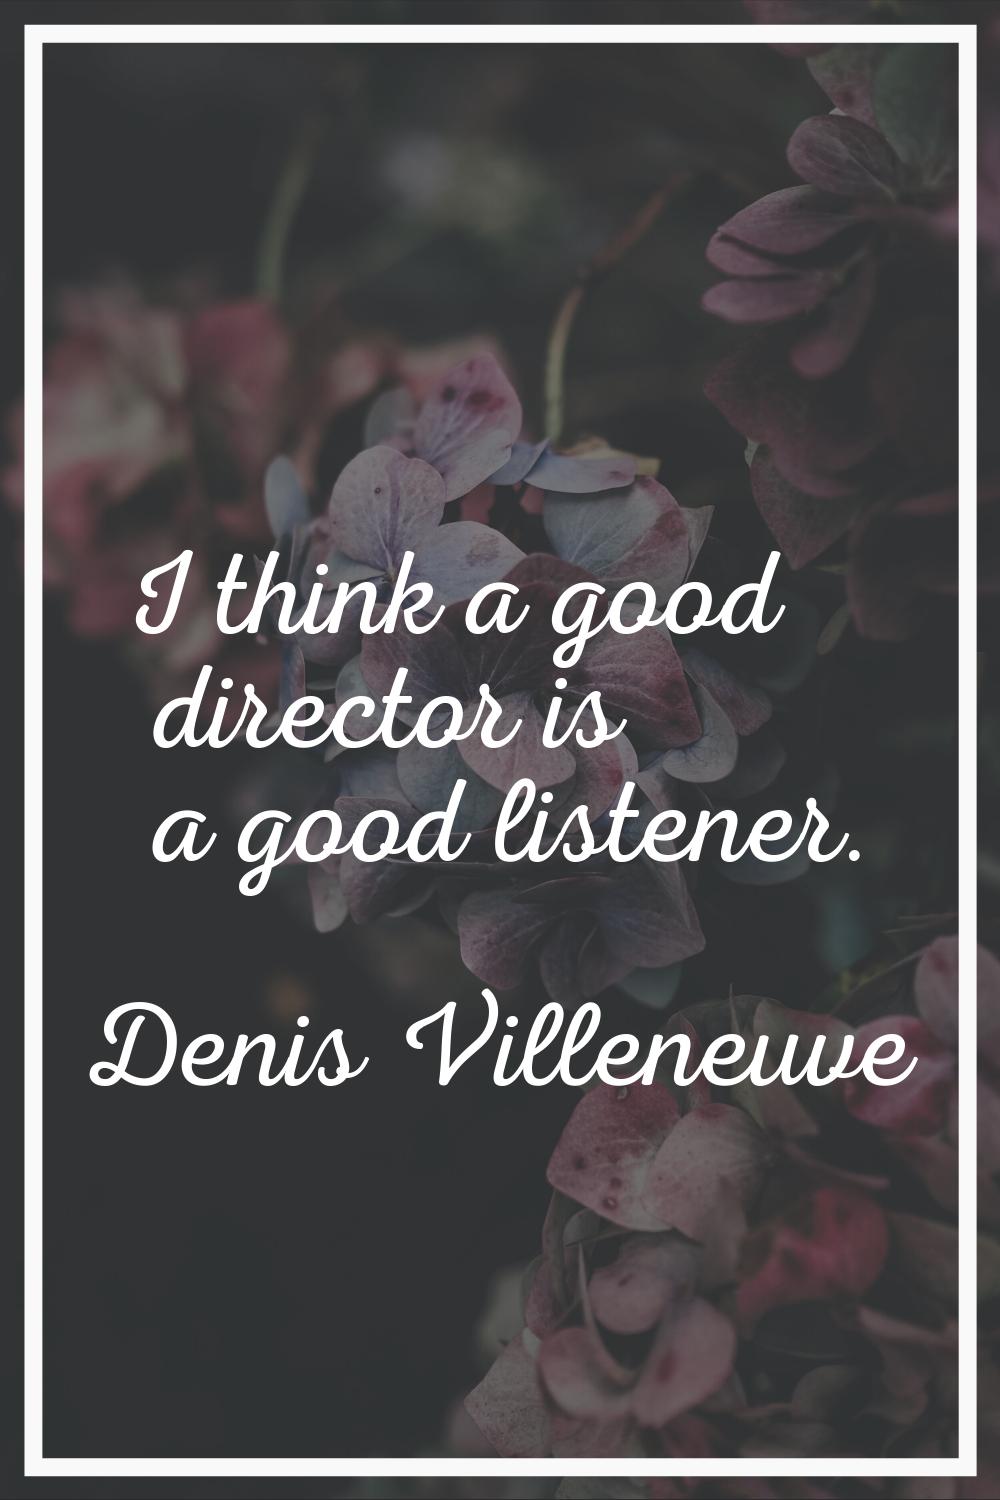 I think a good director is a good listener.